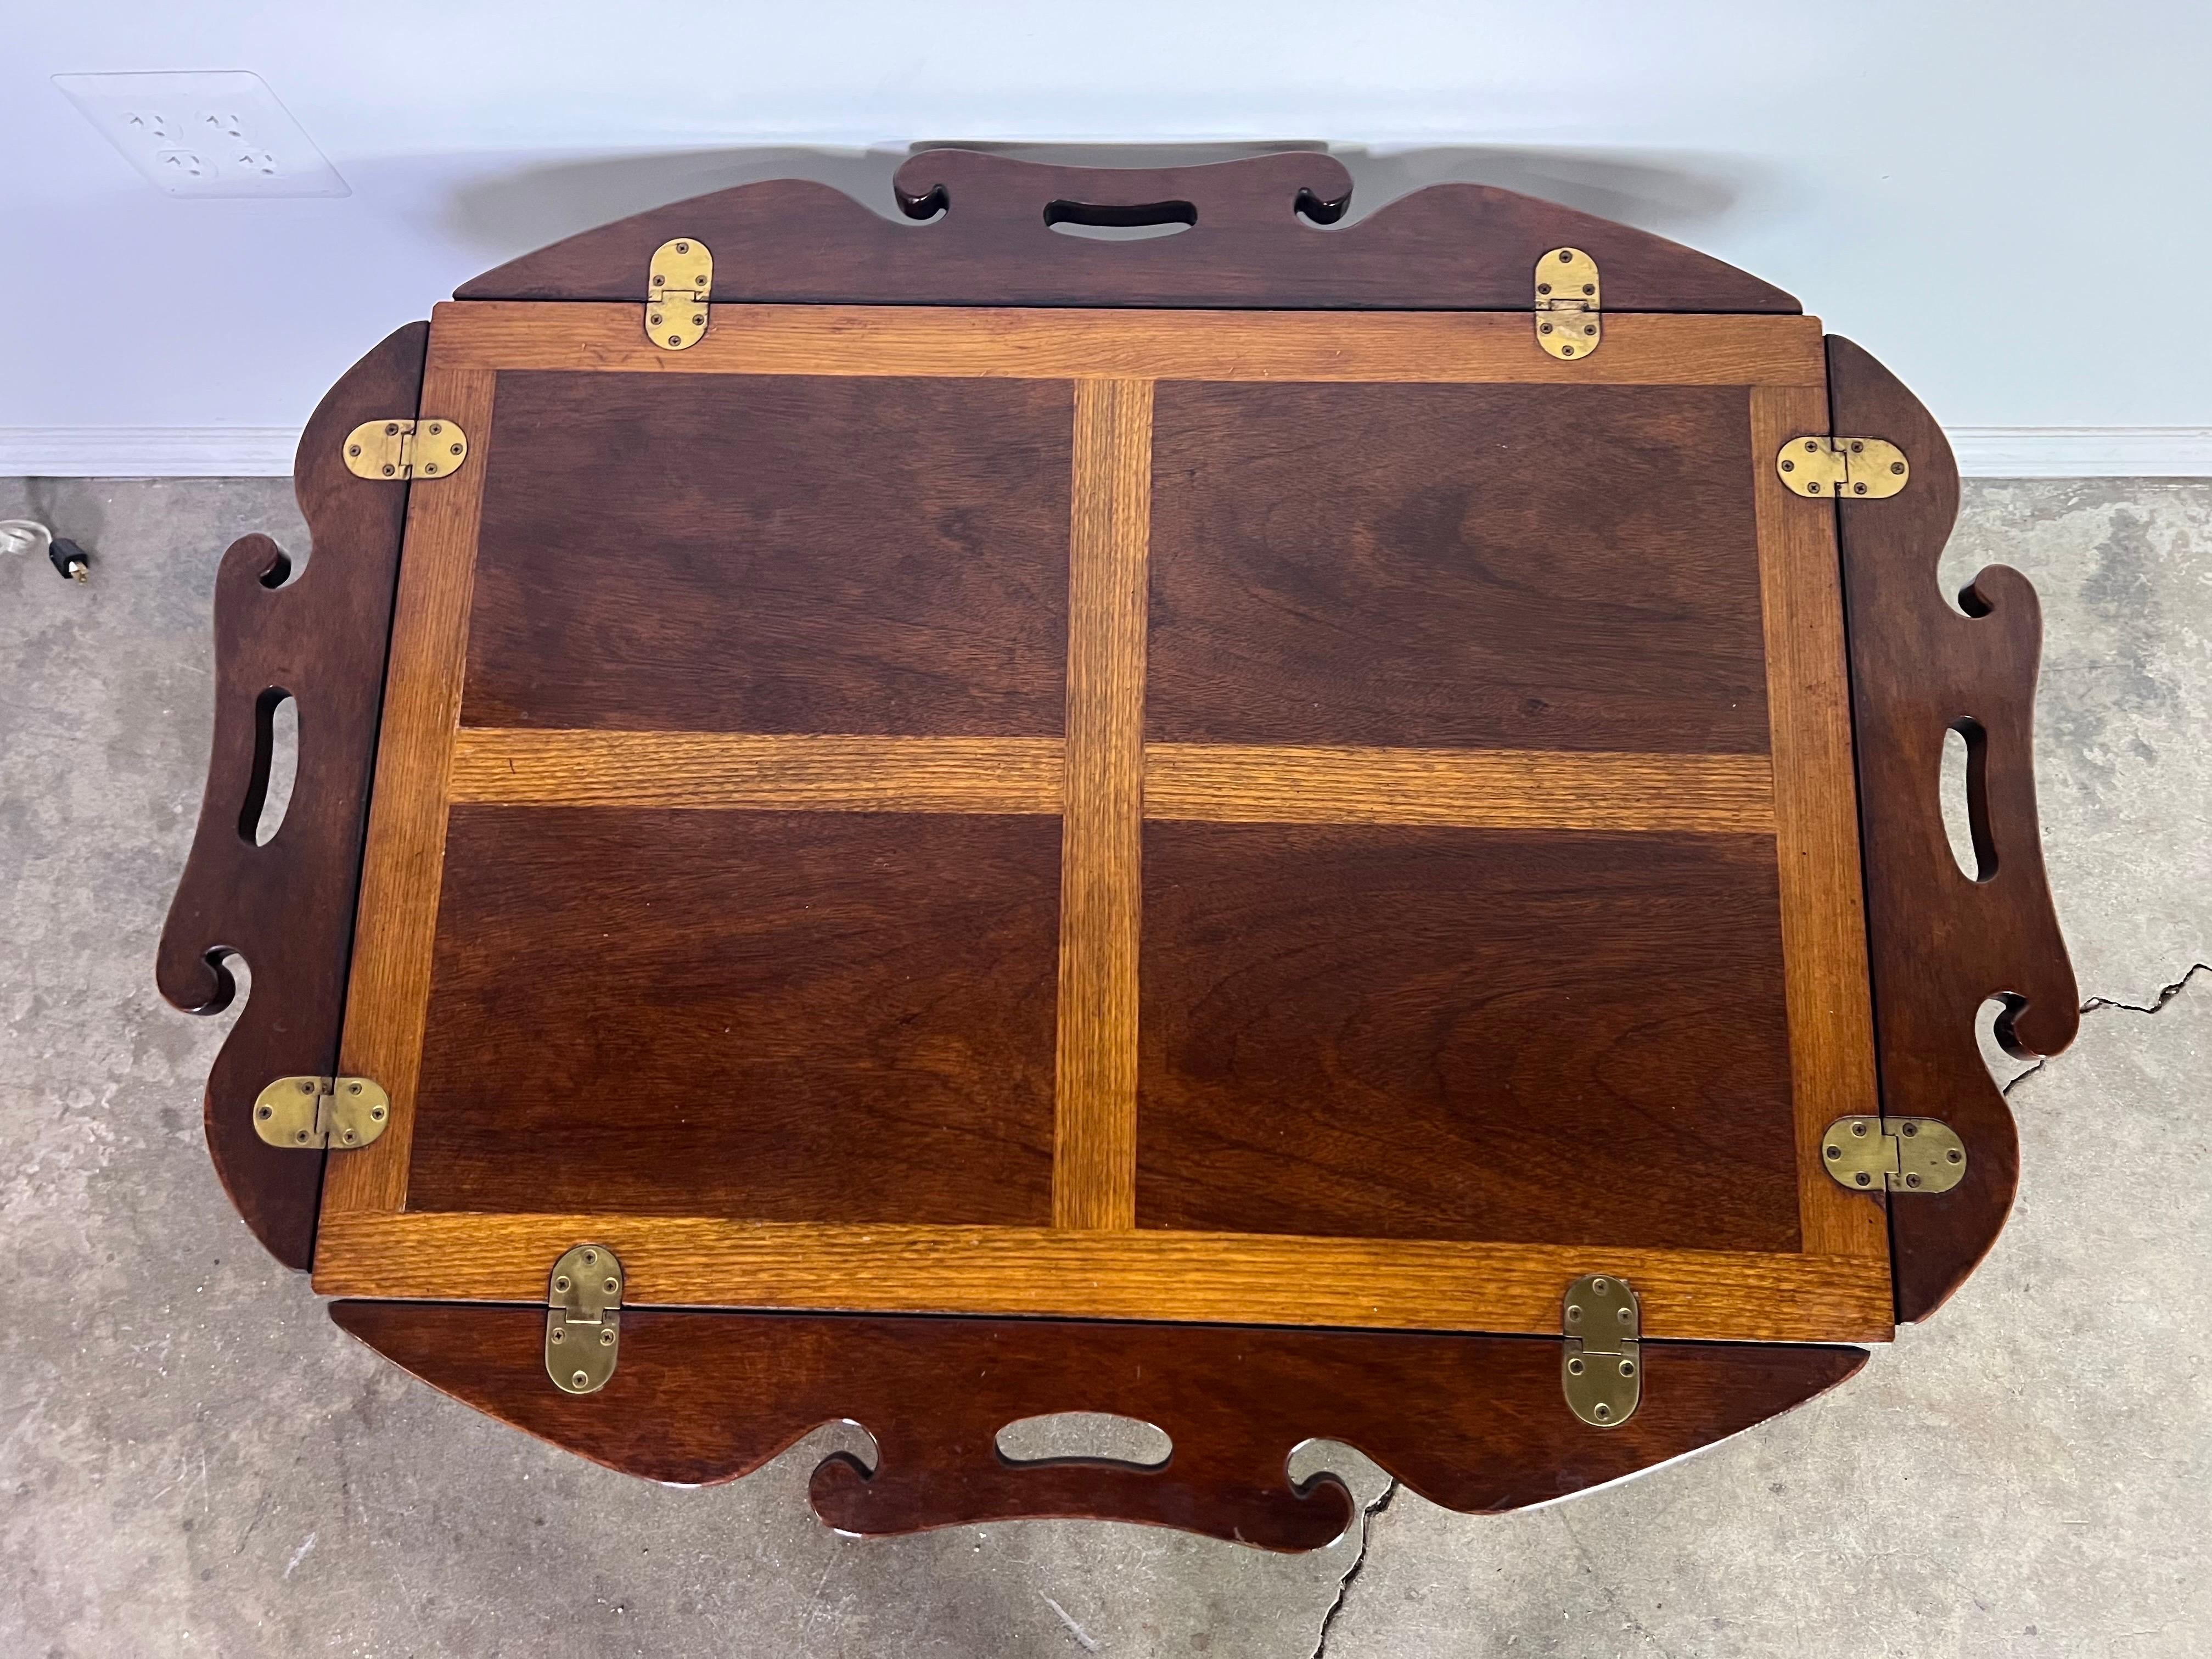 Mid-20th Century English Chippendale Inlaid Mahogany Tea Table C. 1940's For Sale